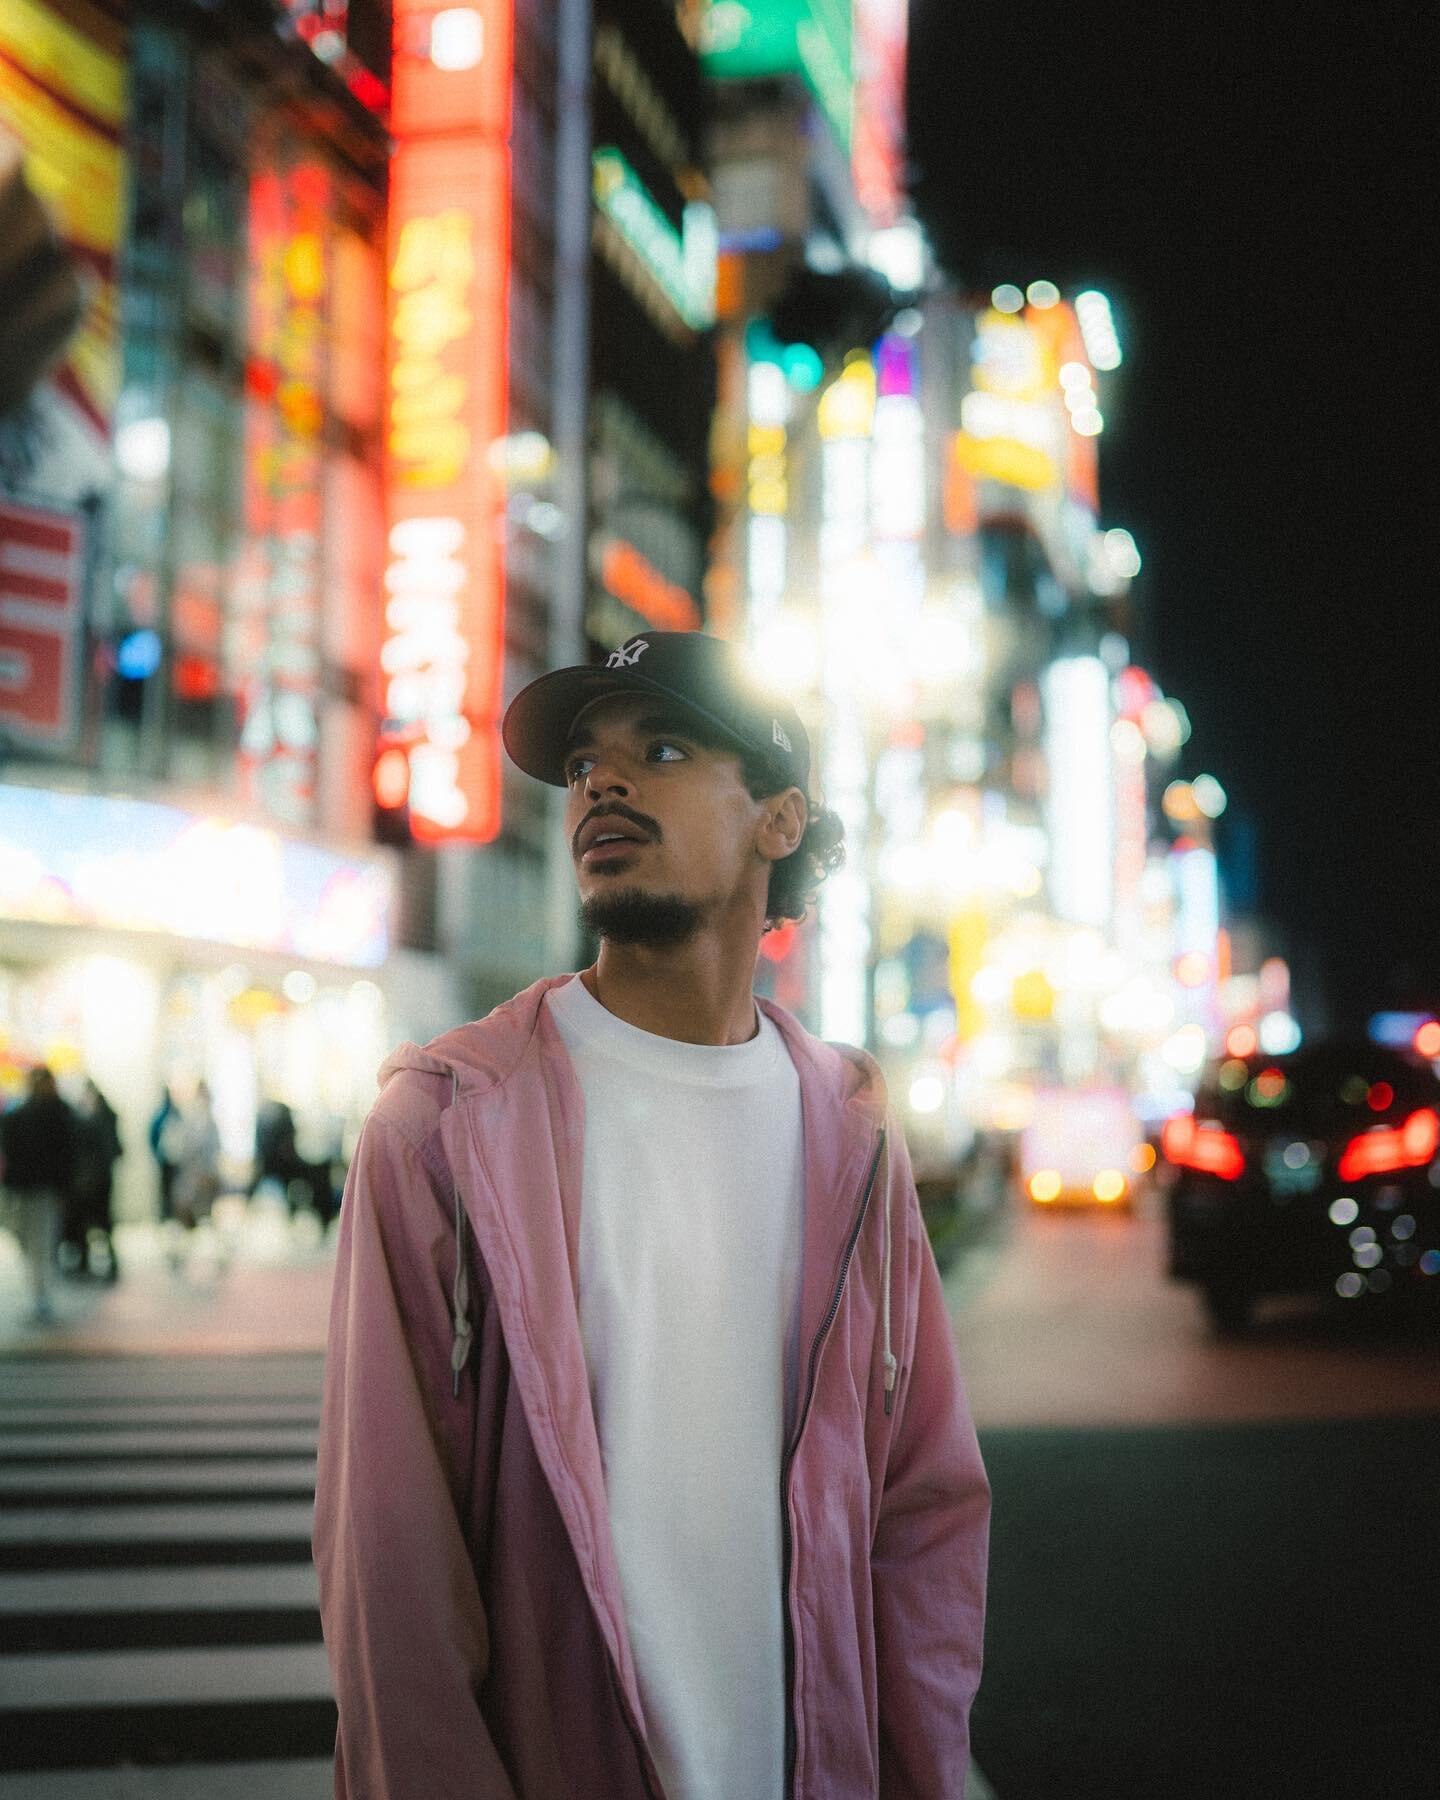 The SHOT x BTS of a night session in Tokyo

BTS by @deboroyfilms 

#tokyophotographer #tokyonightportrait #tokyoportraitphotographer #tokyonightlife